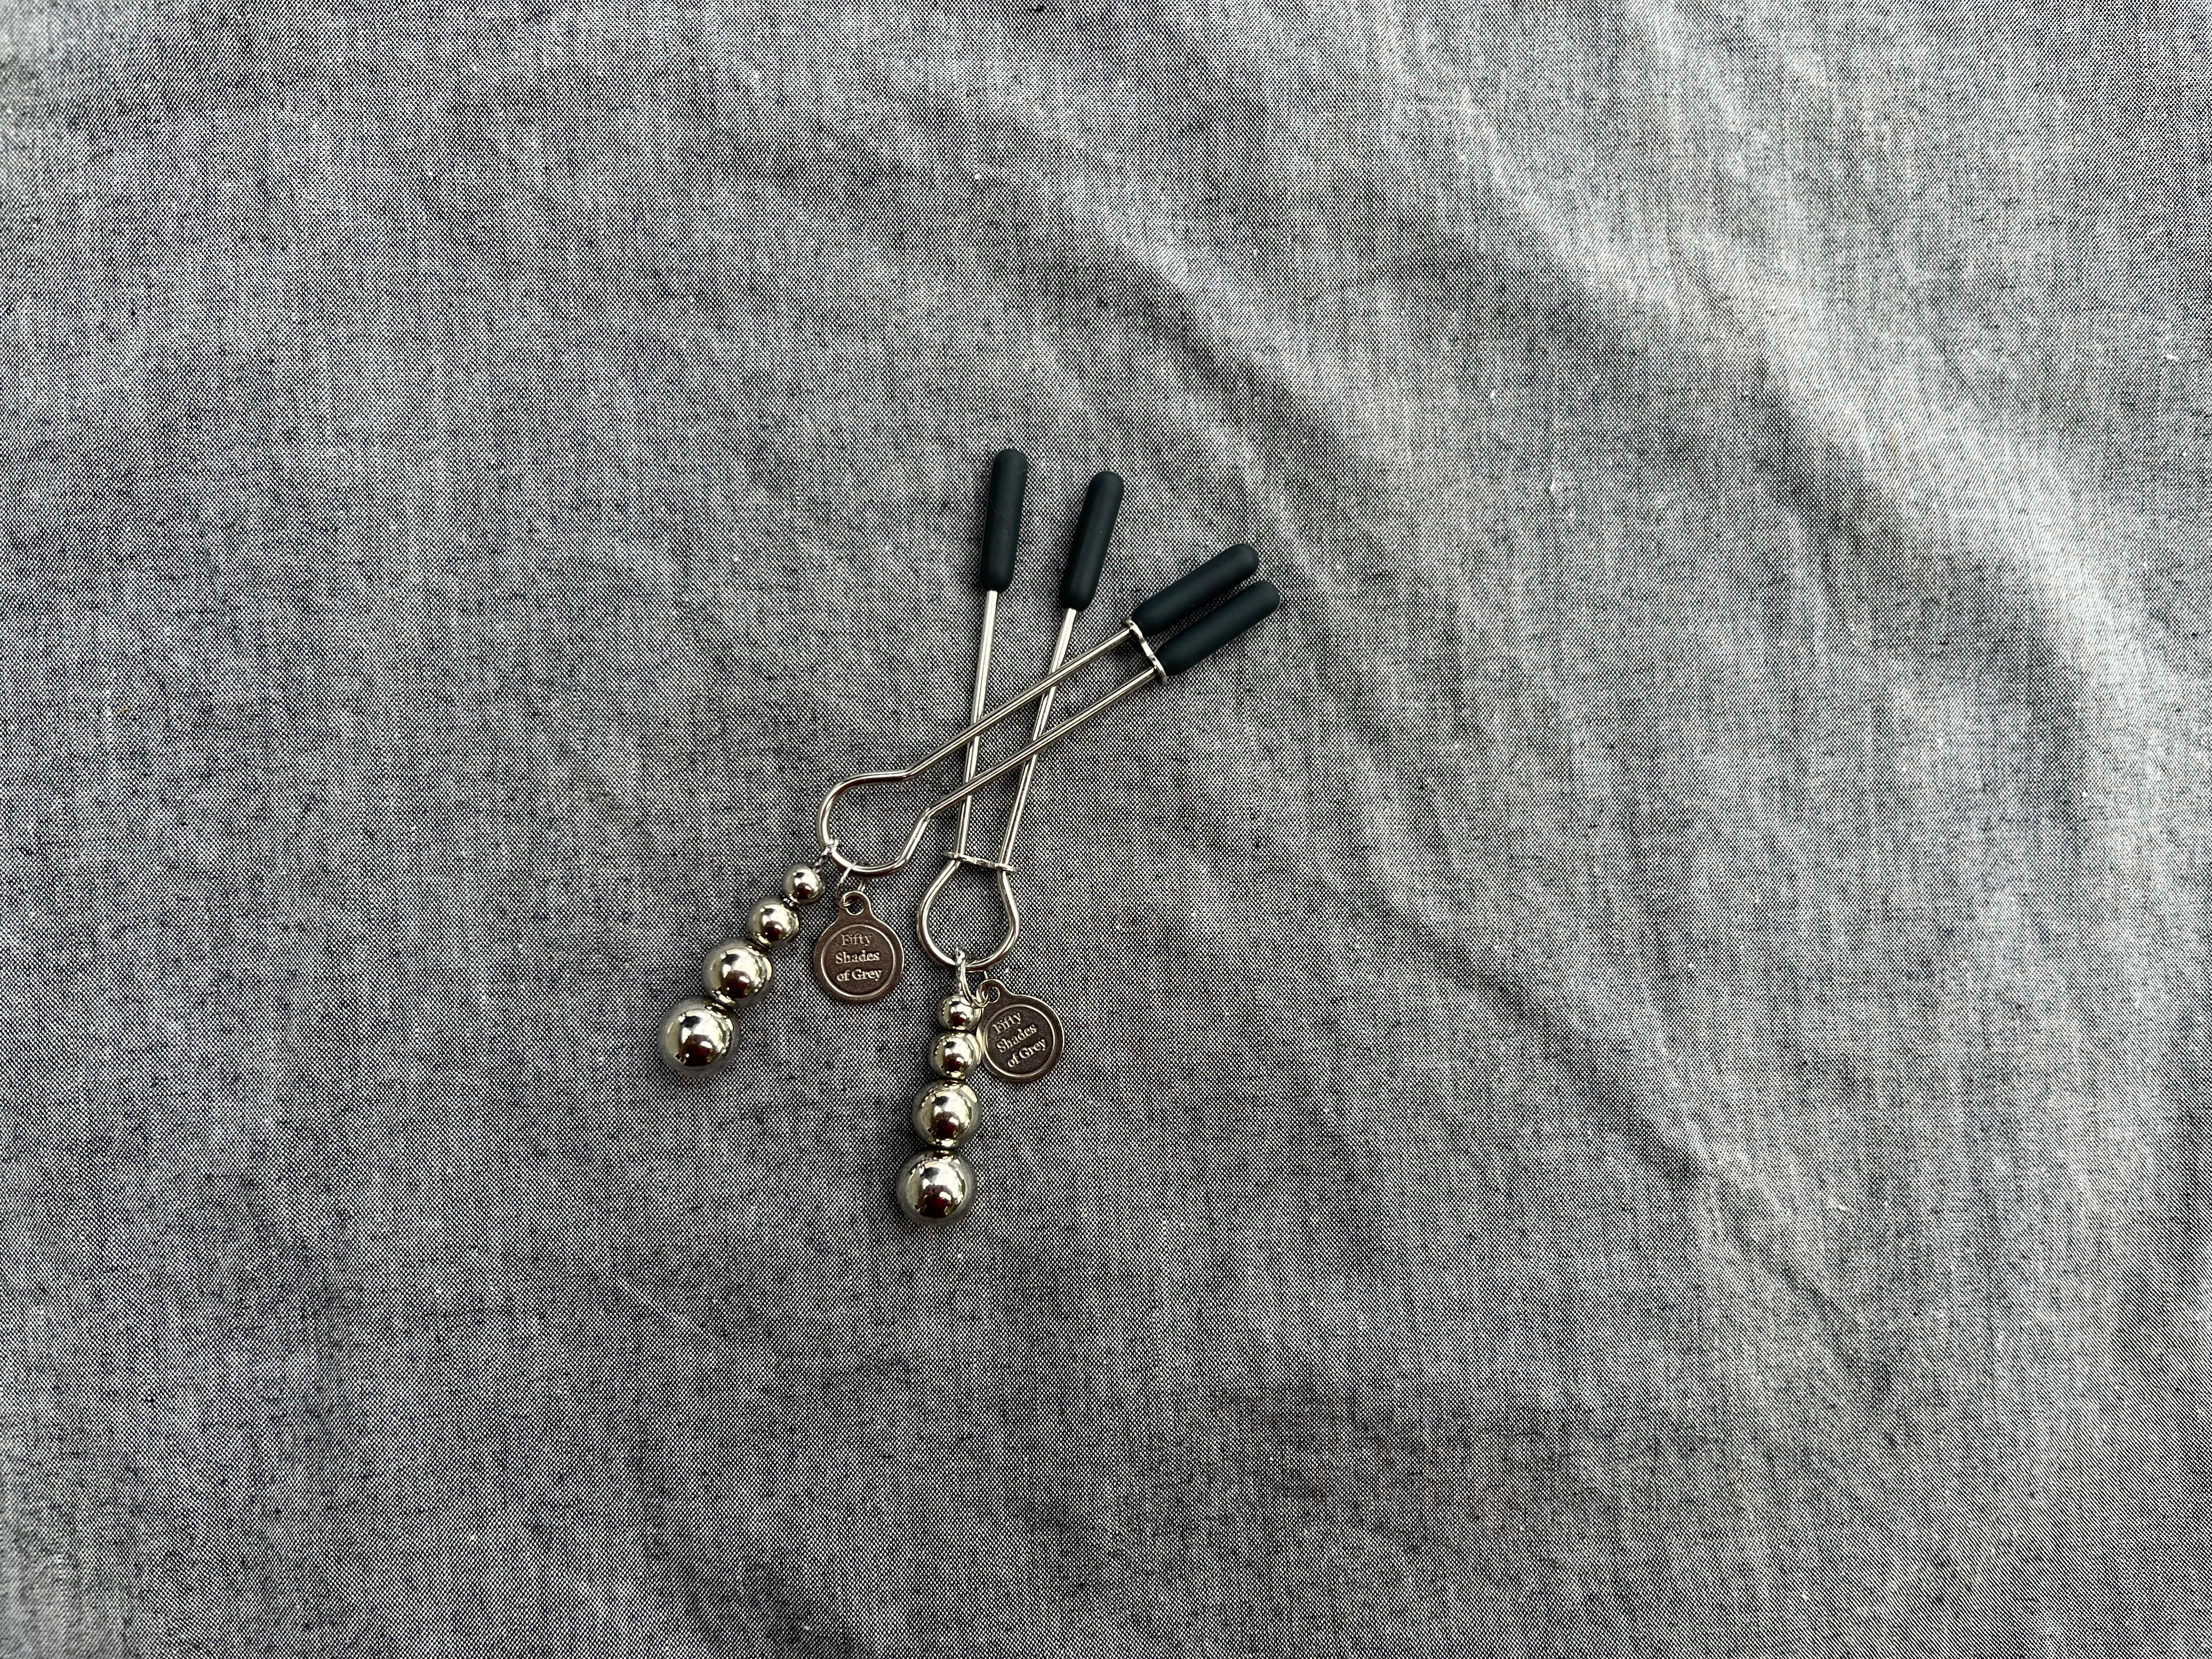 Fifty Shades of Grey Adjustable Nipple Clamps. Slide 2